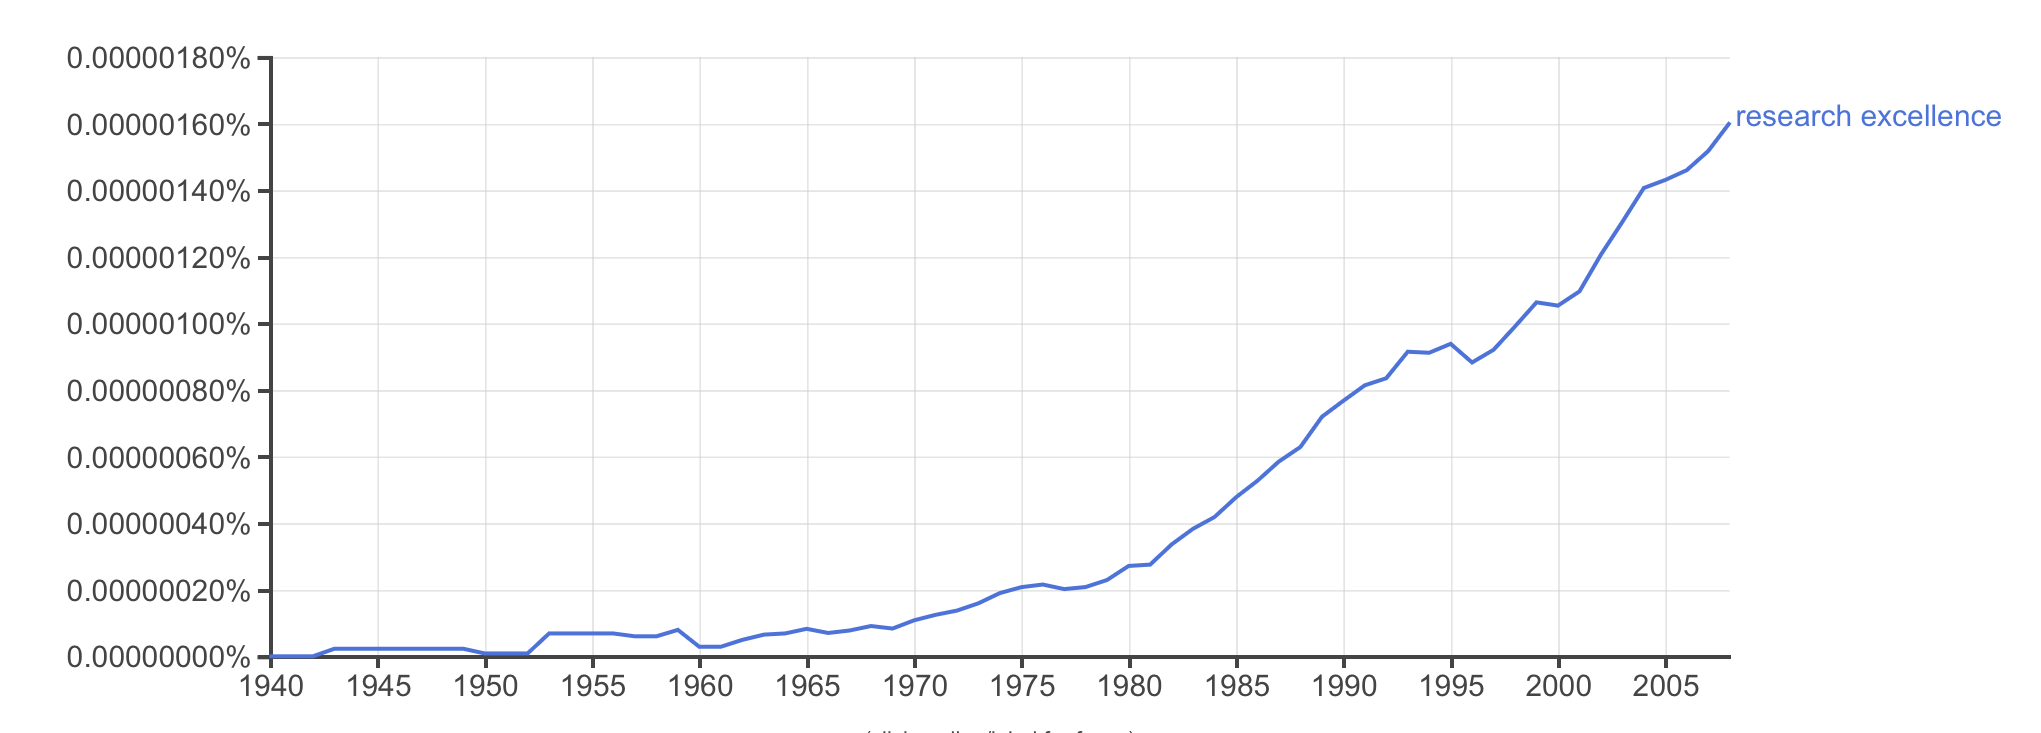 Google ngram for research excellence